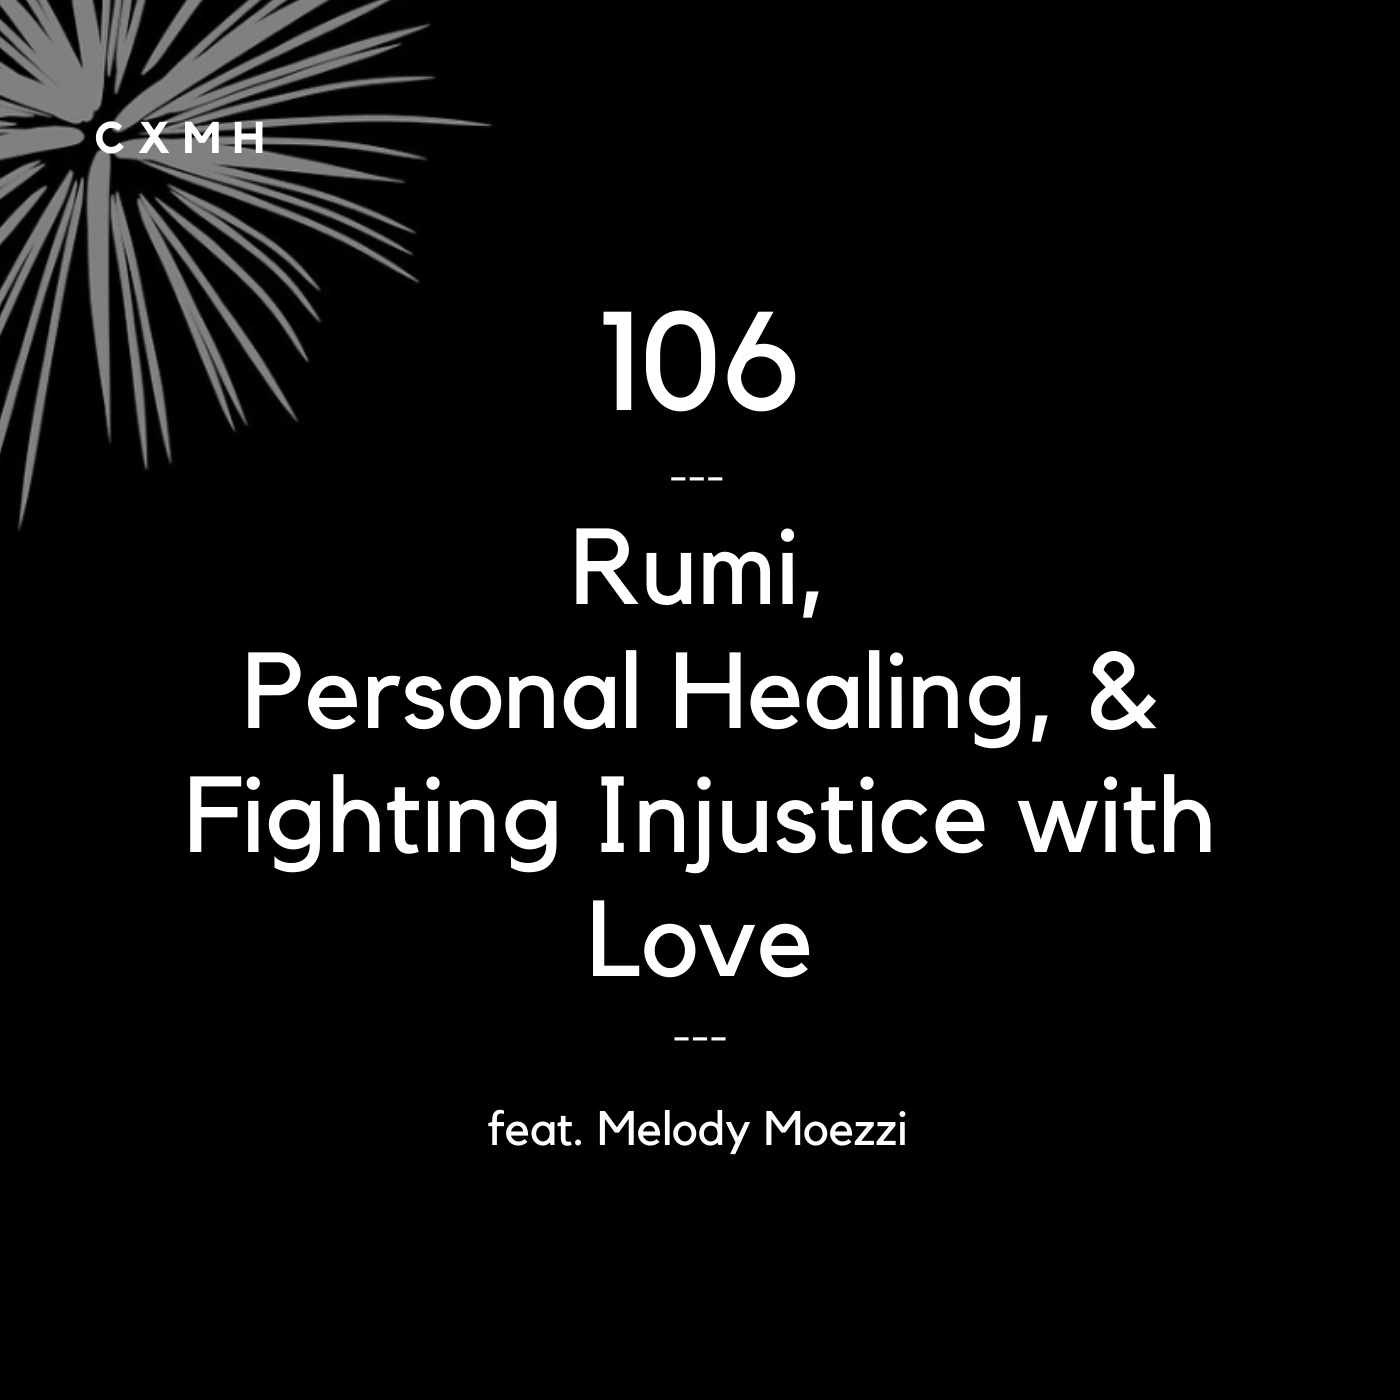 106 - Rumi, Personal Healing, & Fighting Injustice with Love (feat. Melody Moezzi)